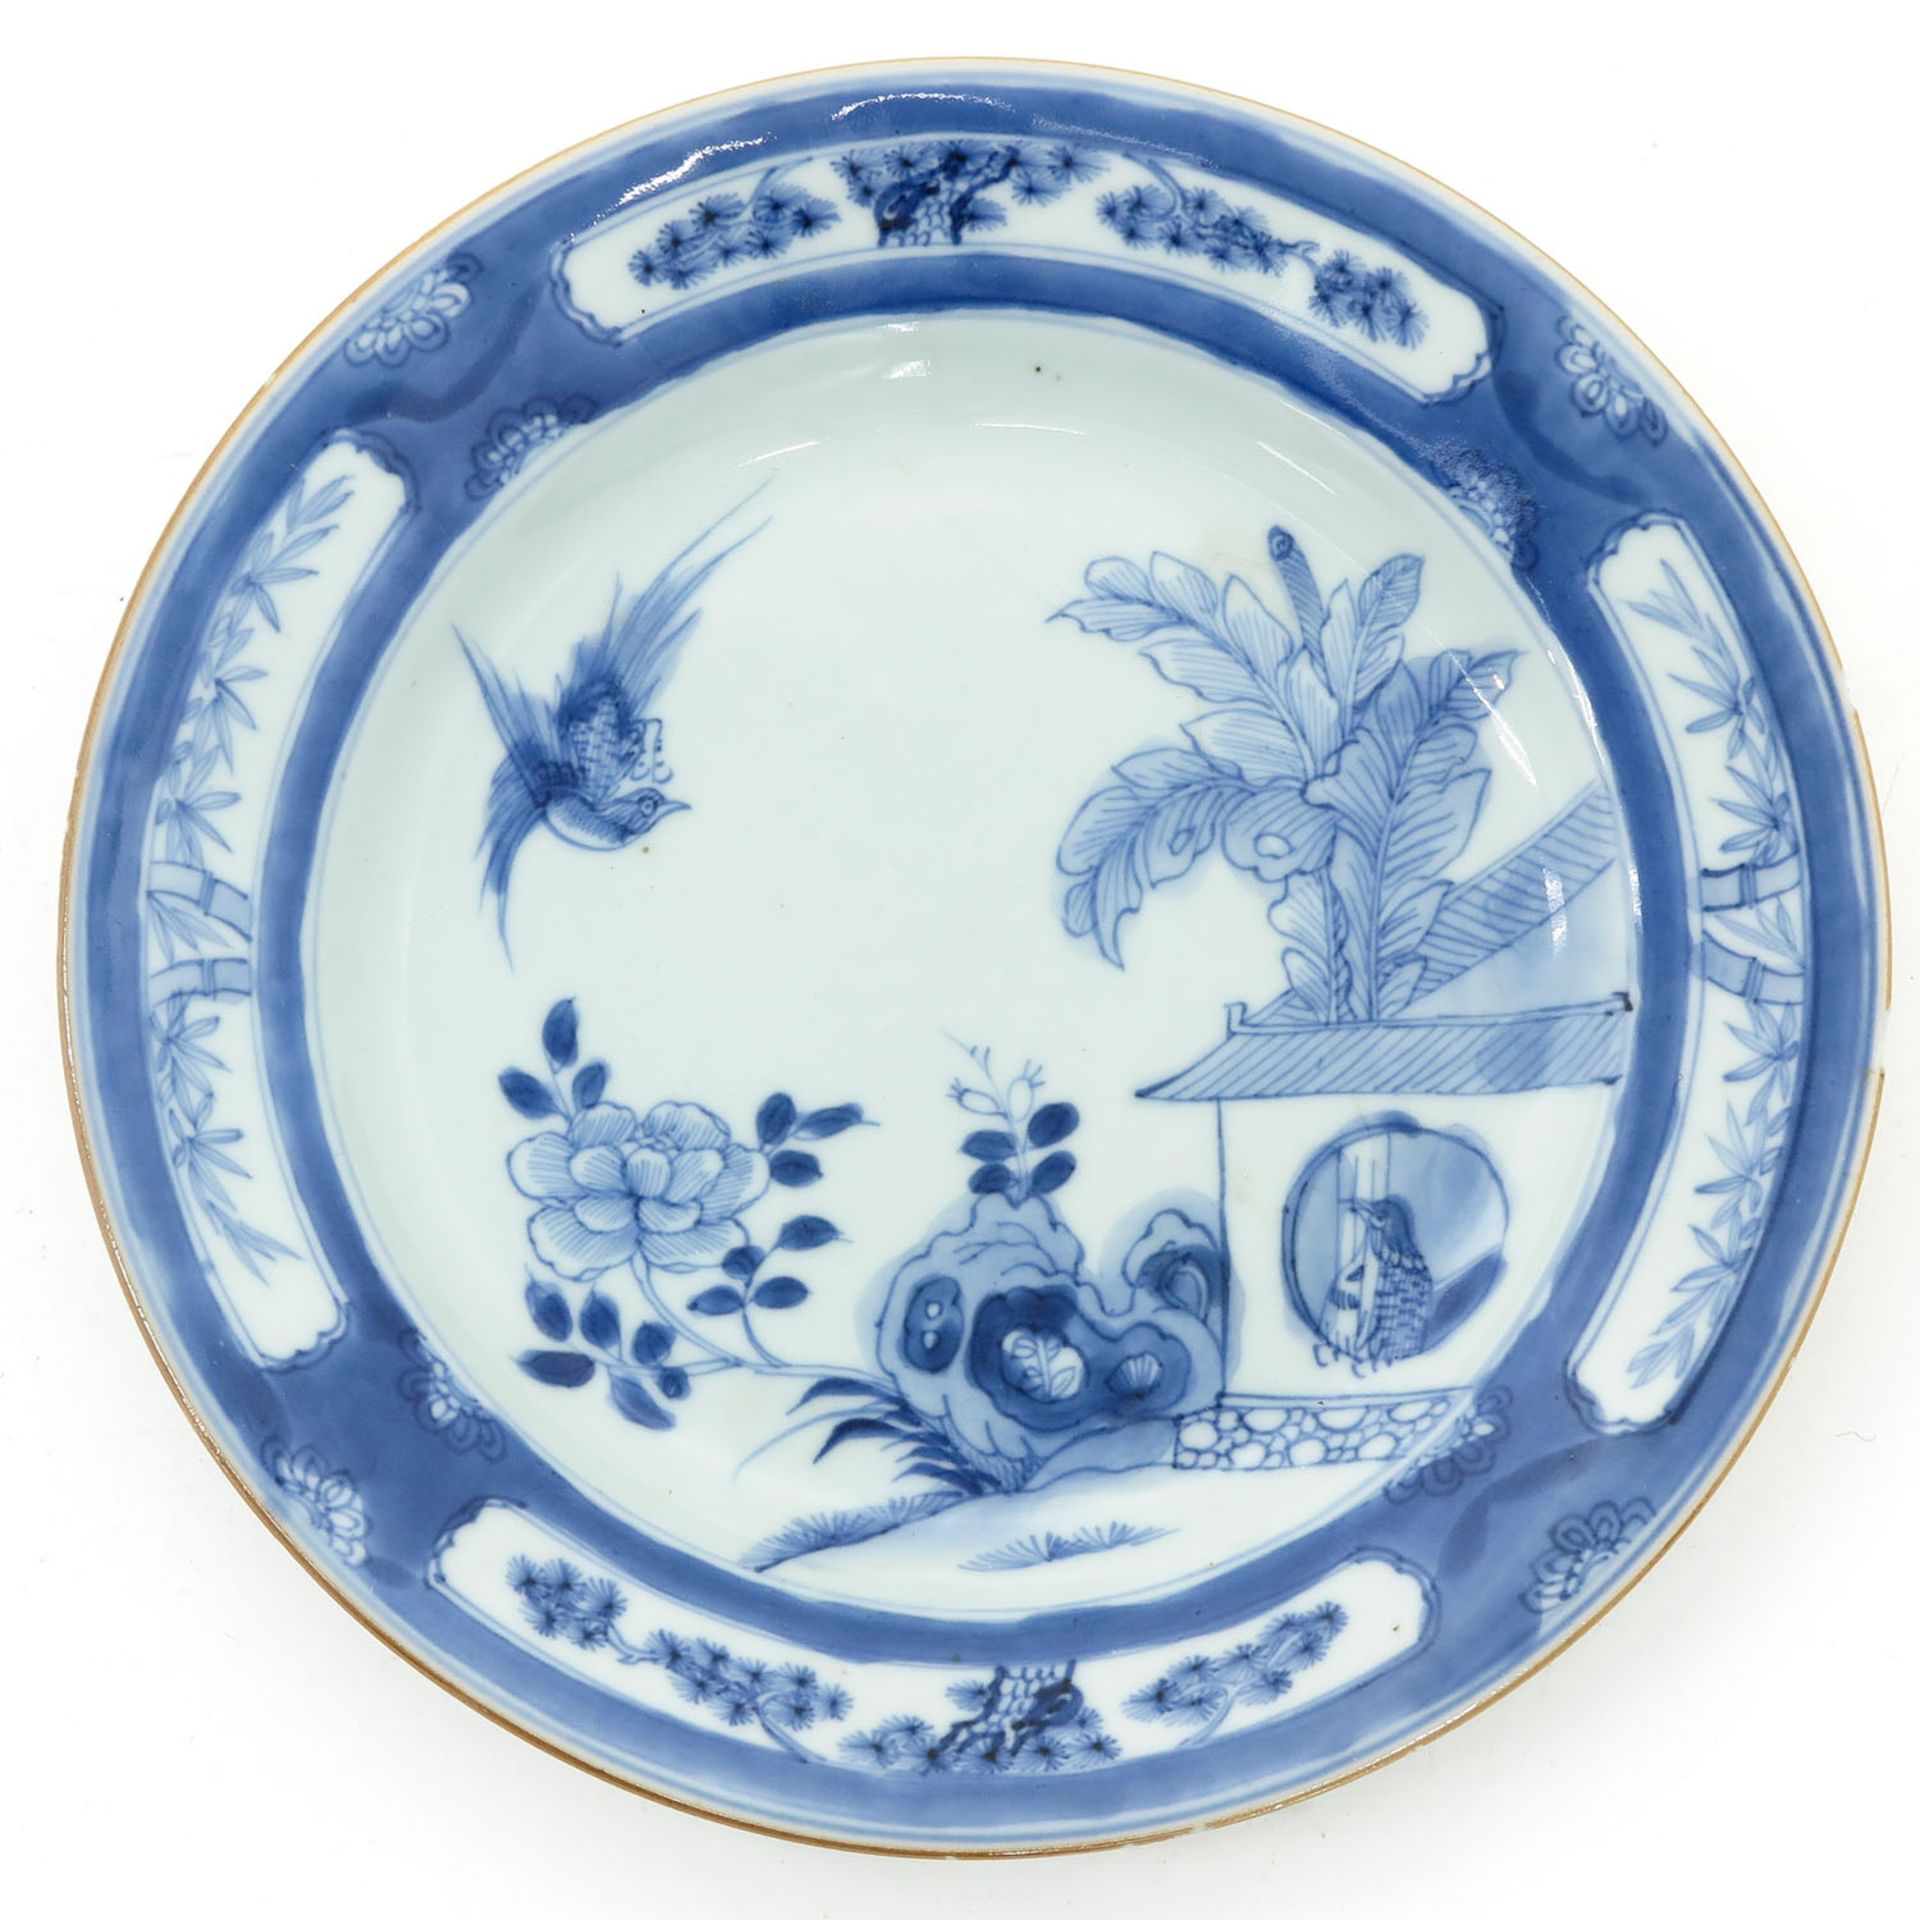 A Series of 6 Blue and White Plates - Bild 5 aus 9